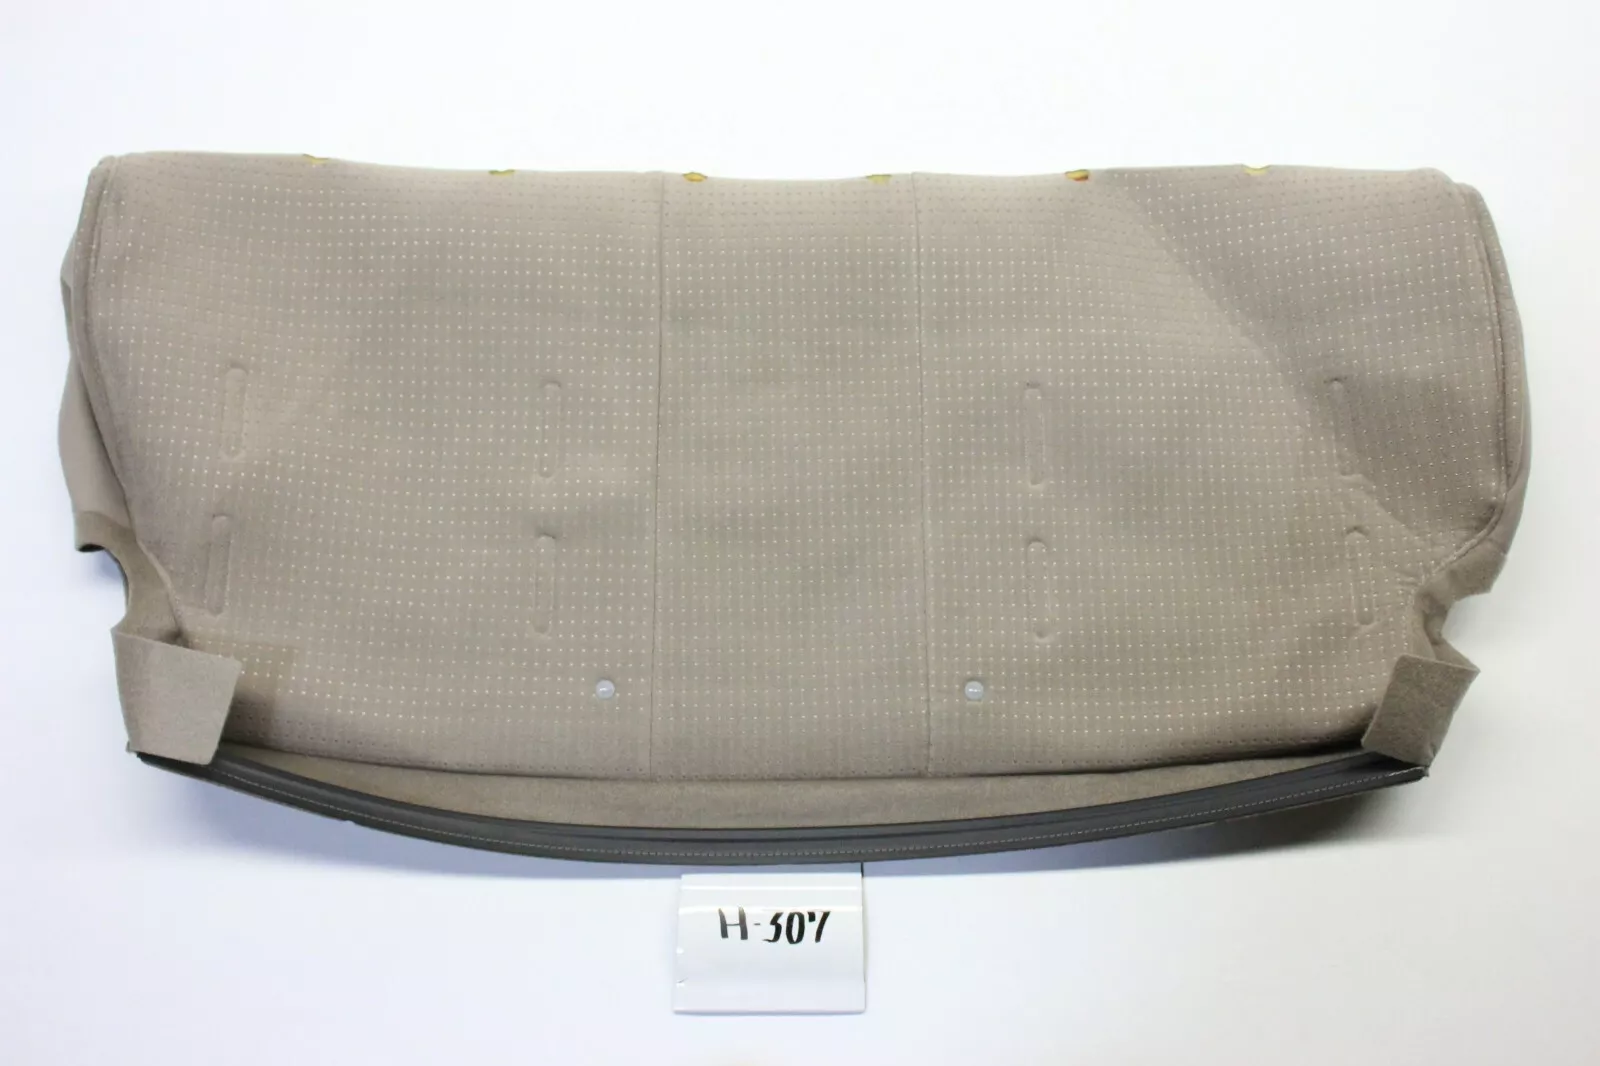 New OEM Nissan 3rd Row Upper Seat Cover 2004-2005 Quest 89620-5Z101 Beige - $94.05